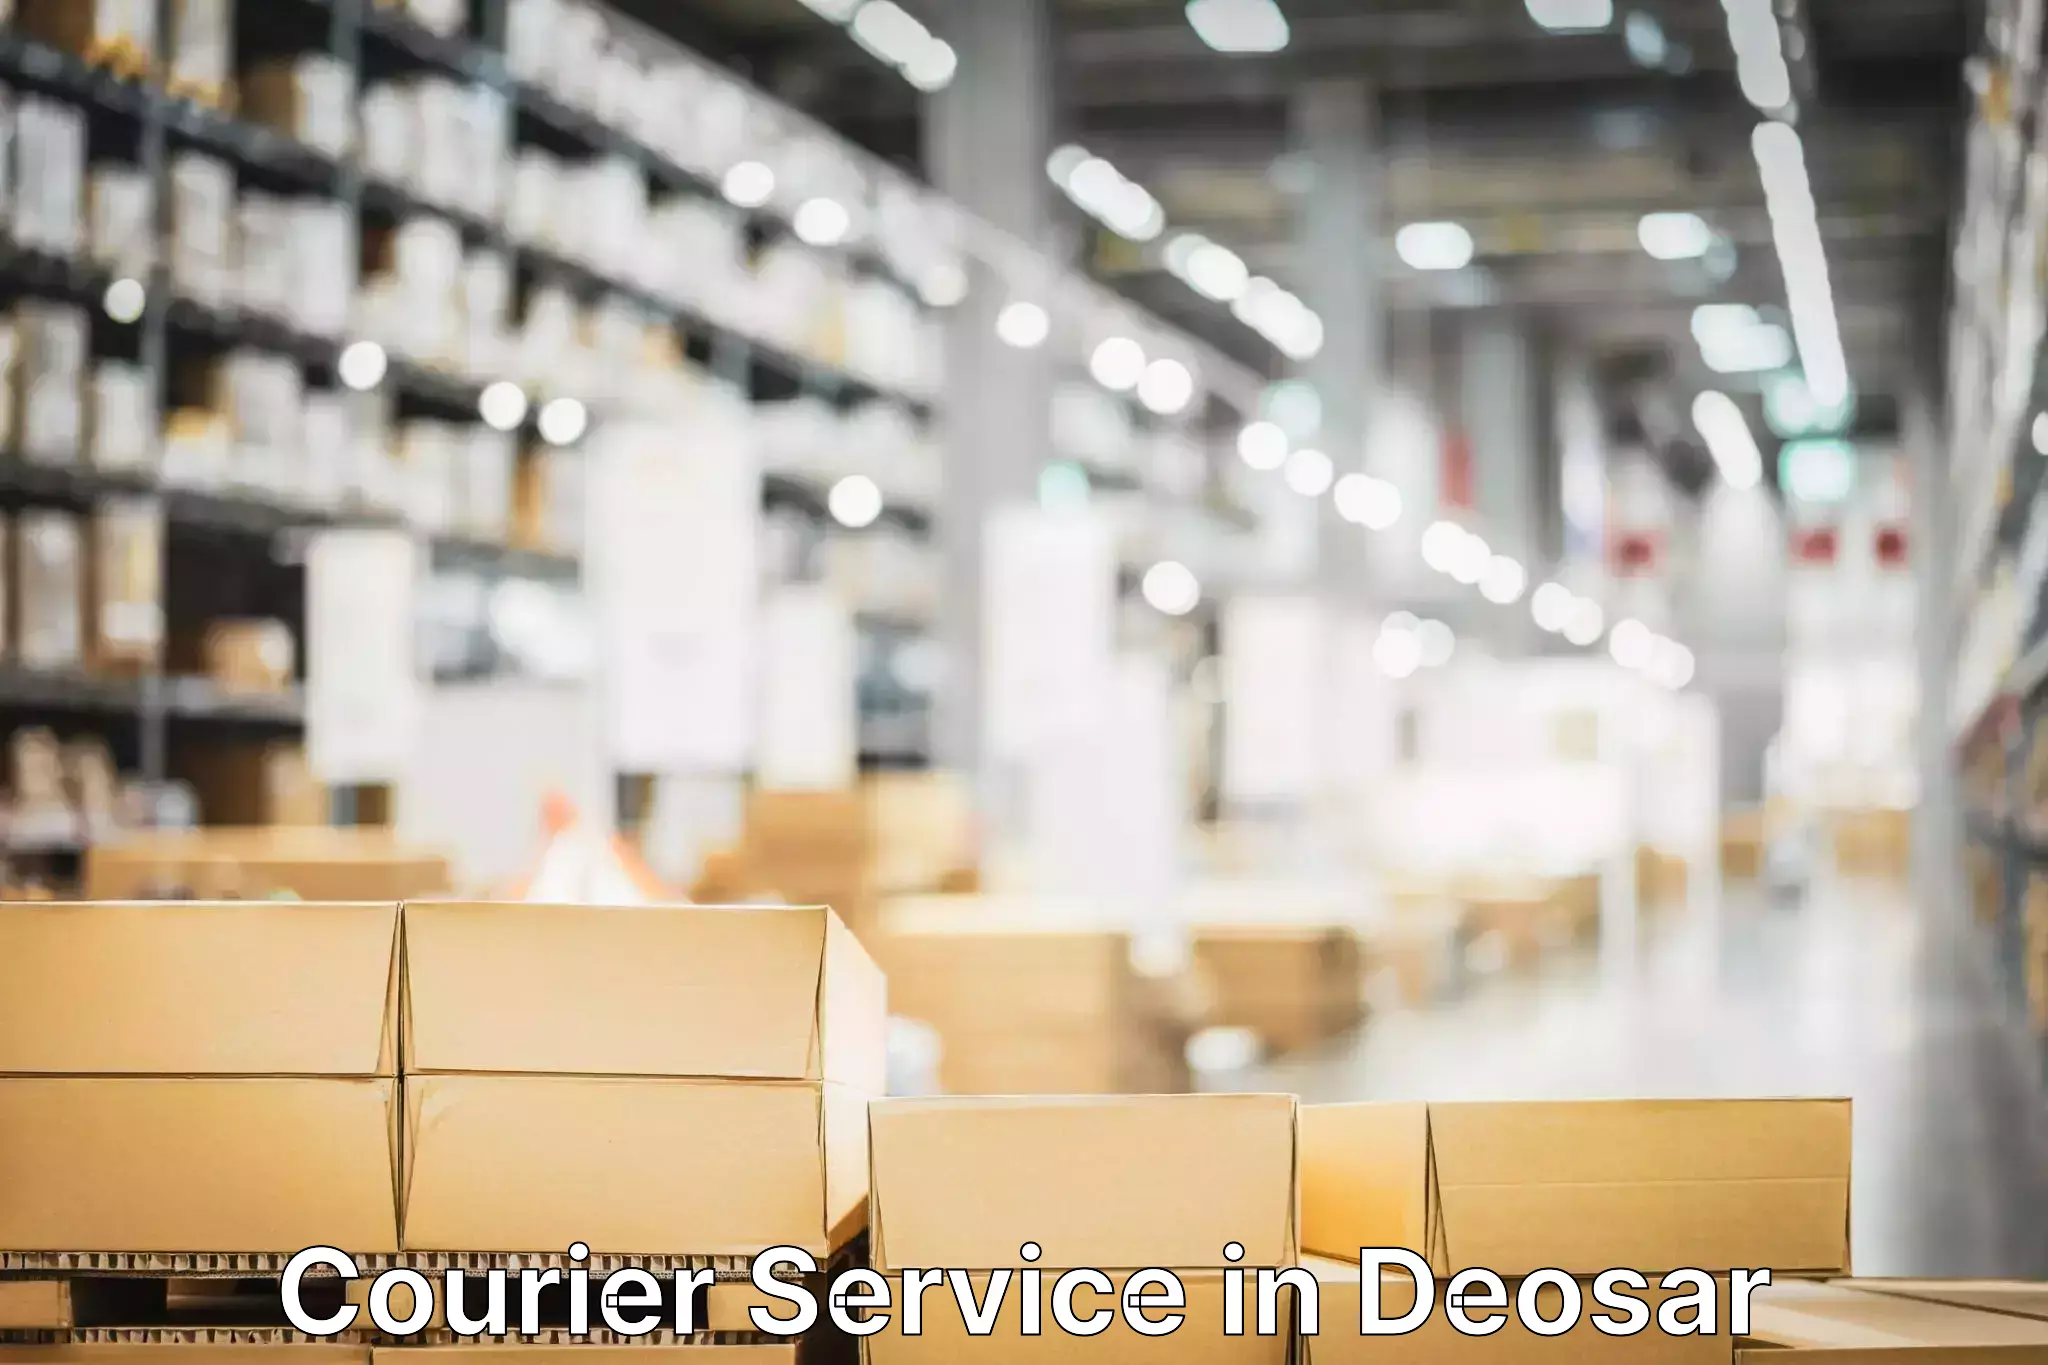 Urban courier service in Deosar